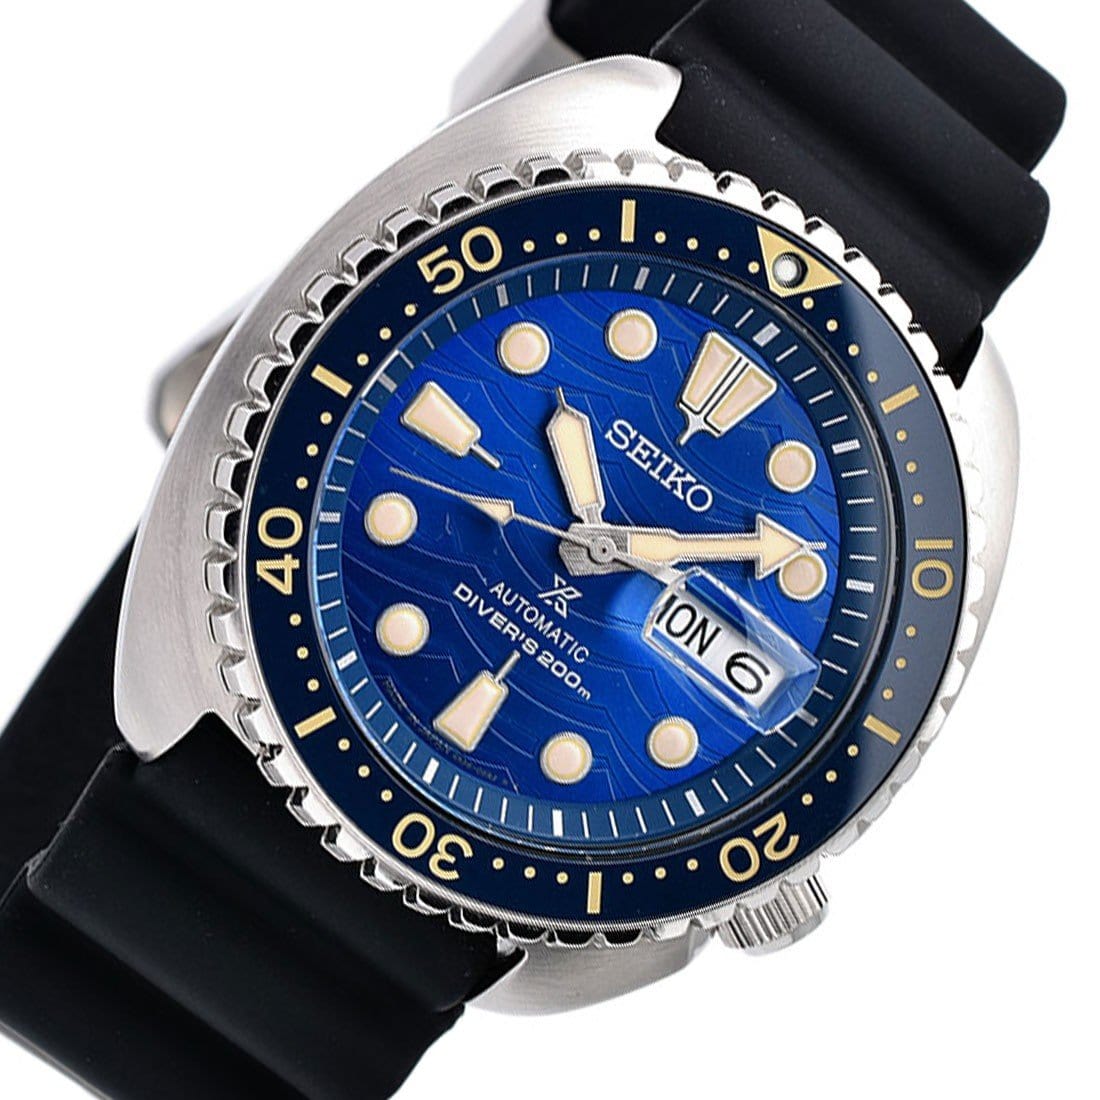 SBDY047 Seiko Prospex Turtle Save The Ocean Automatic Blue Dial Male Divers Watch